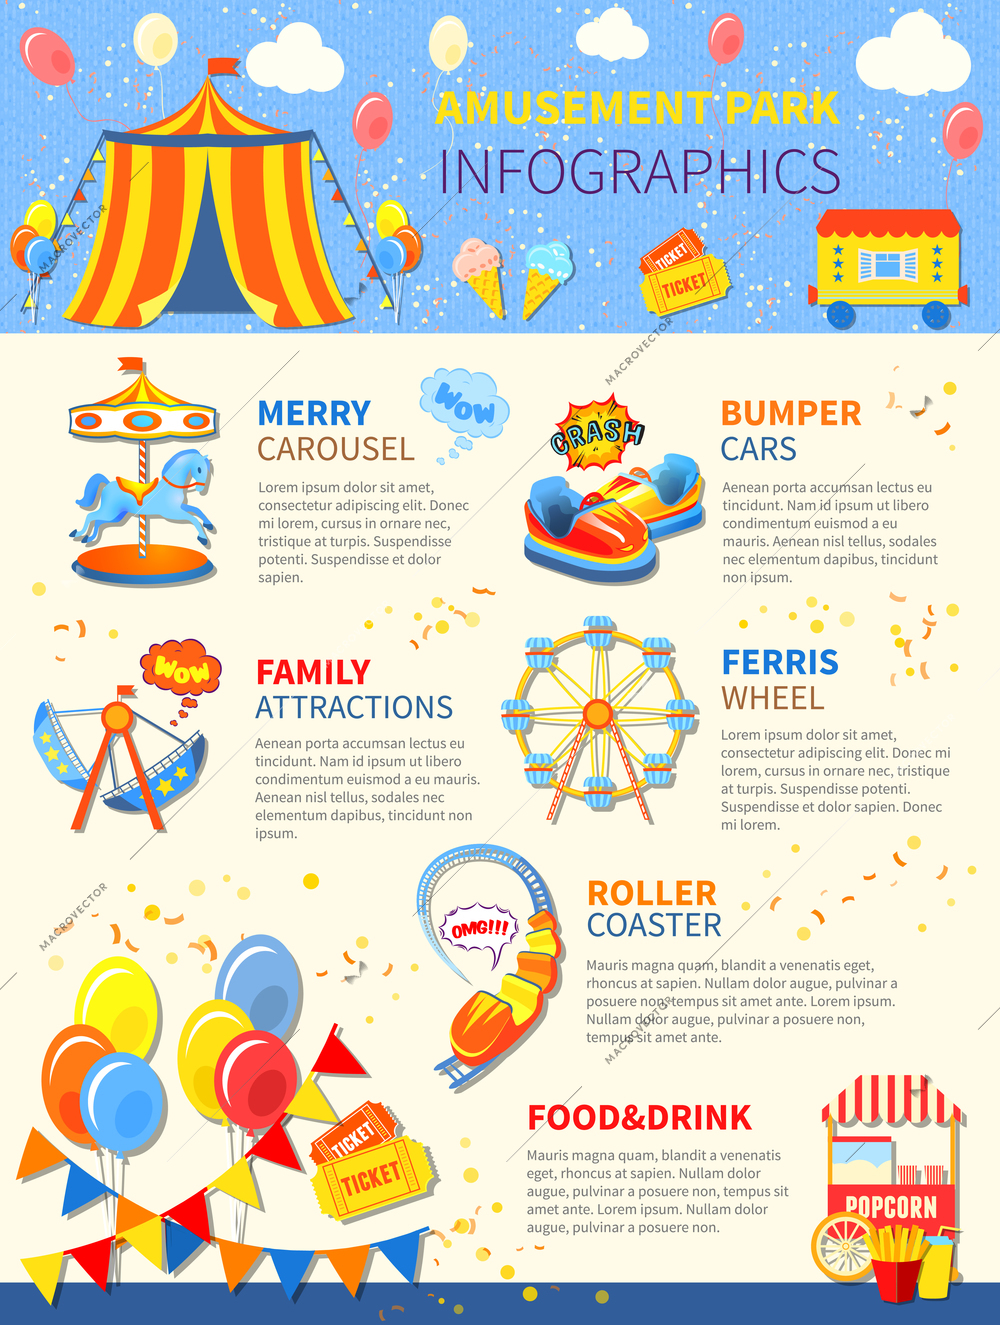 Amusement park infographics layout with carousel and attractions vector illustration